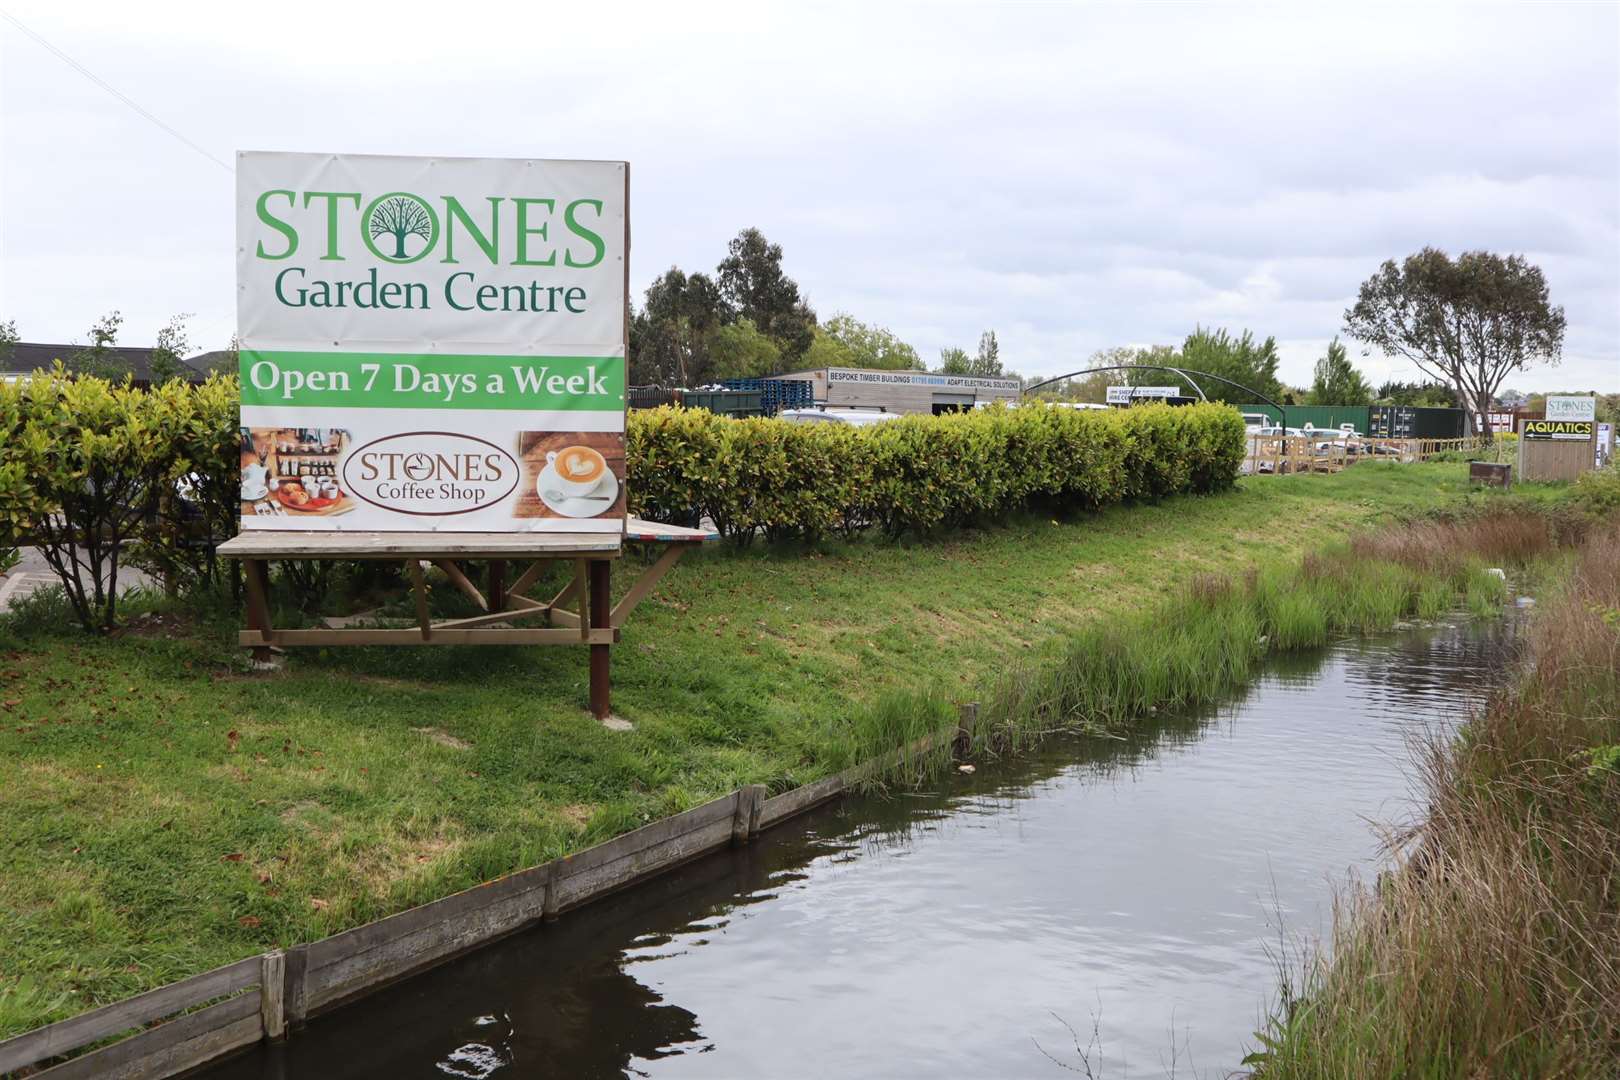 A number of items were stolen during the raid at Stones Garden Centre in Sheerness